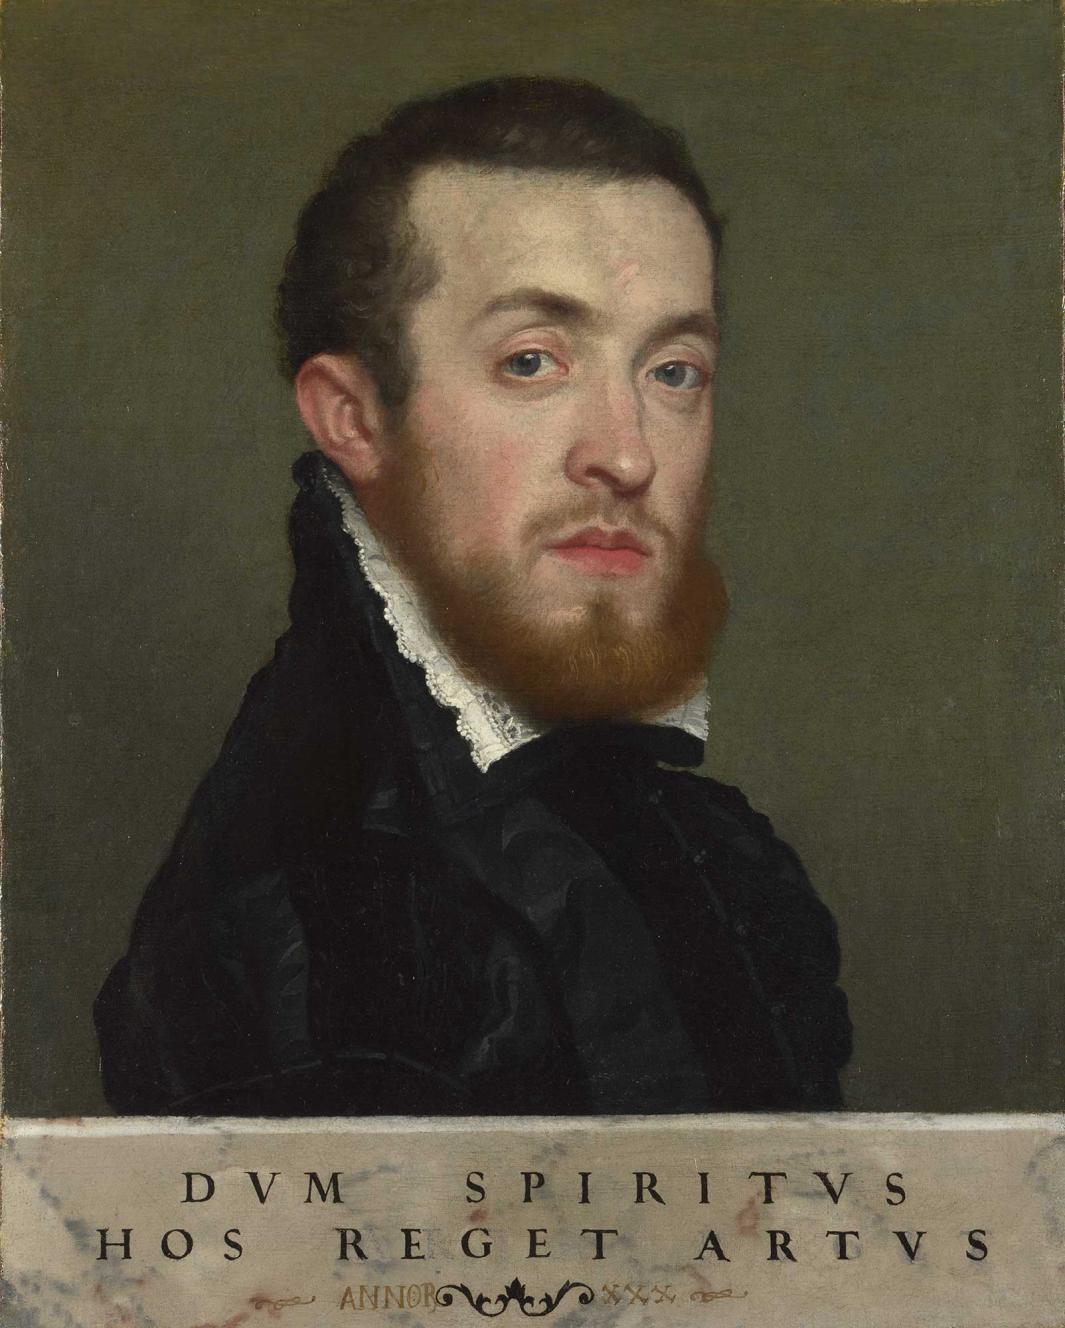 oil painting of bearded man in slight profile, with inscription at bottom